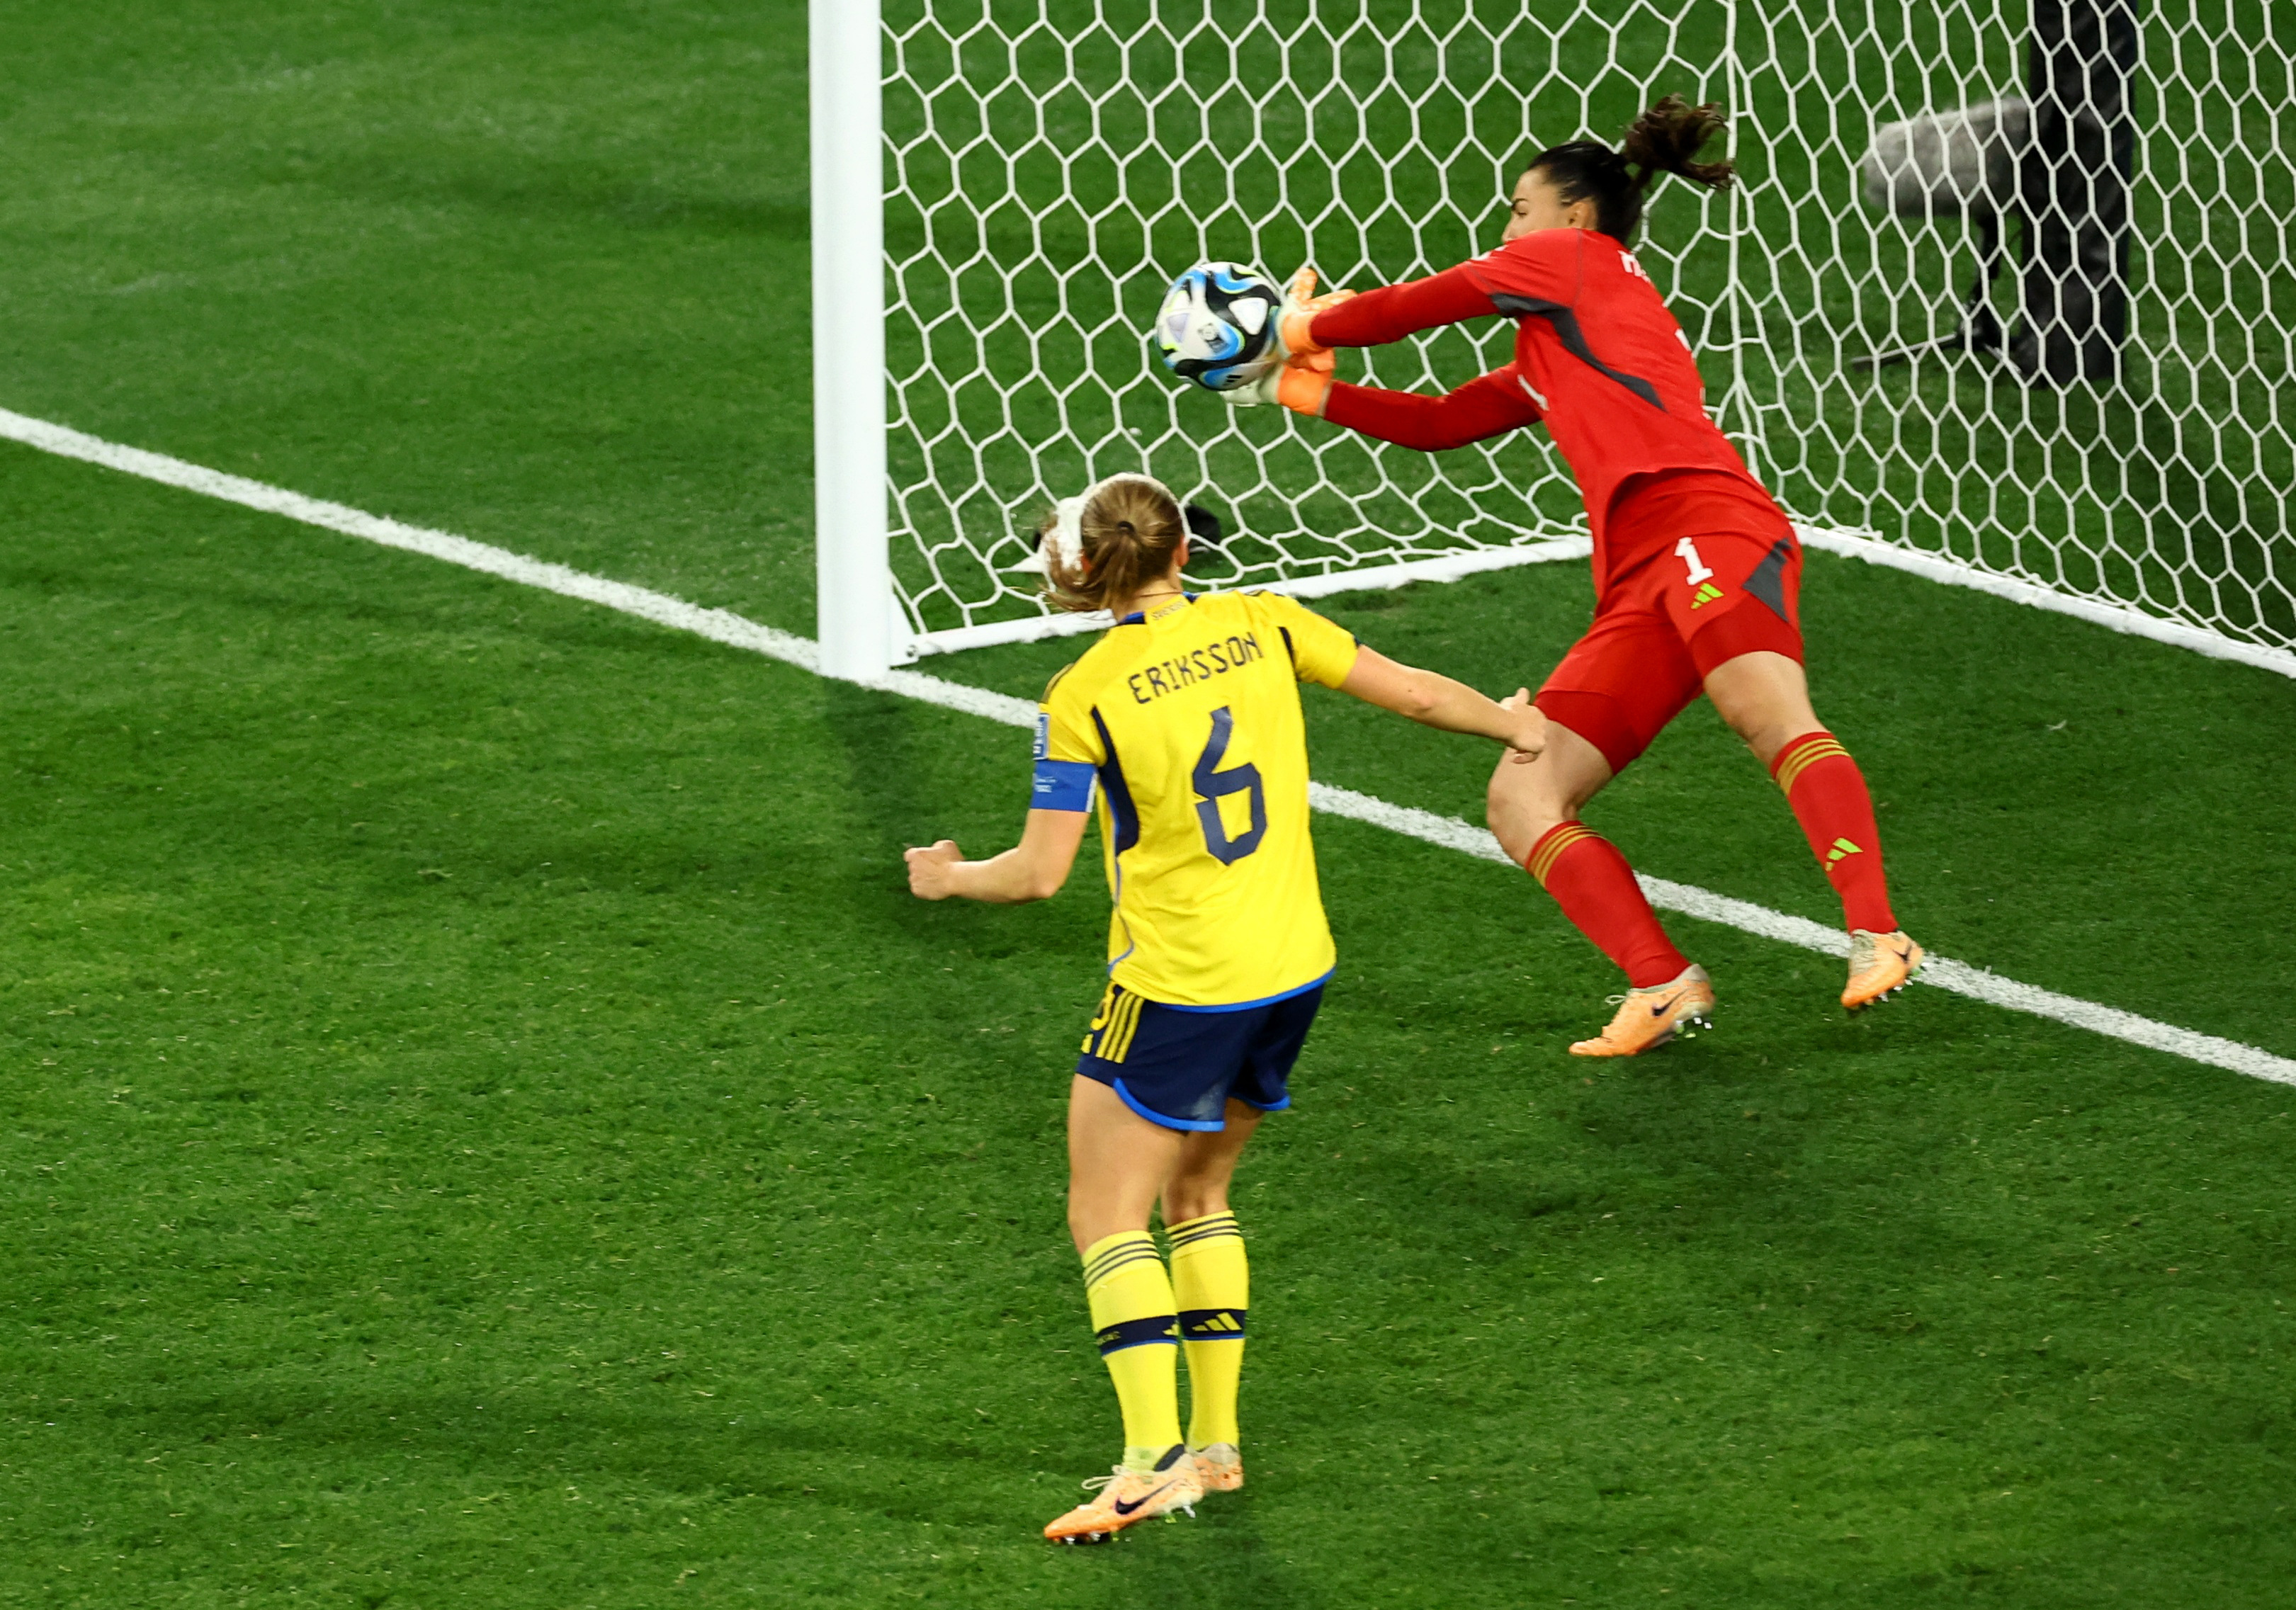 Sweden knocks USA out of World Cup in penalty kicks - ABC News